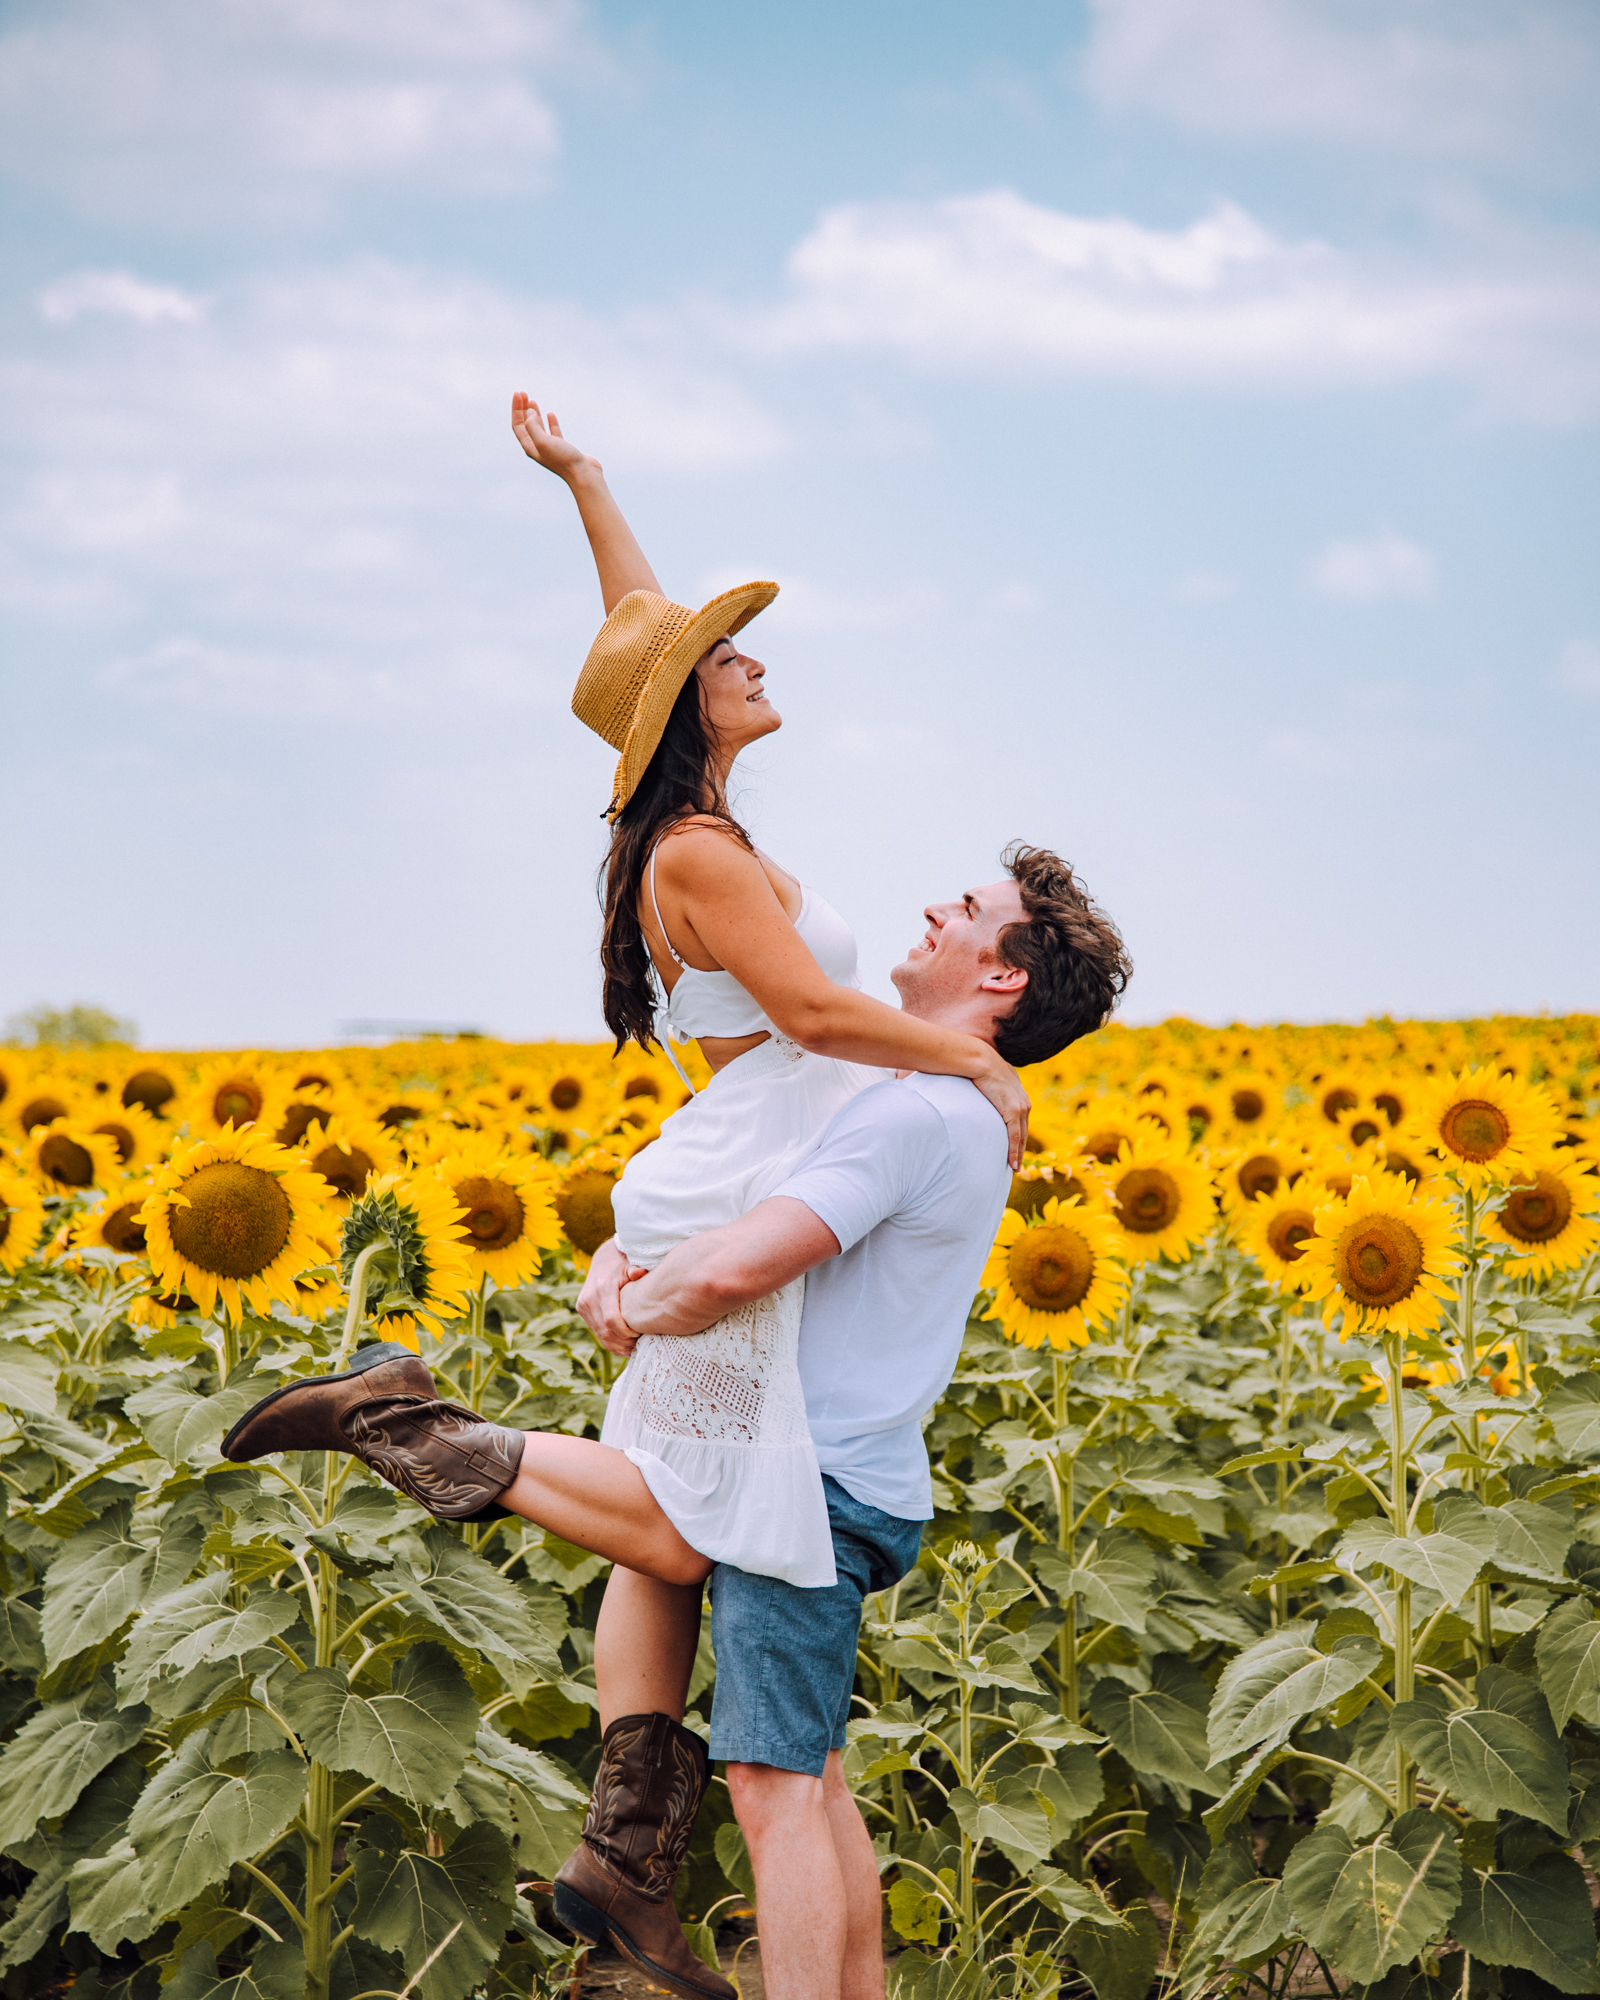 Man holds up a woman wearing a white dress, cowboy hat, and cowboy boots in front of a sunflower field in Texas